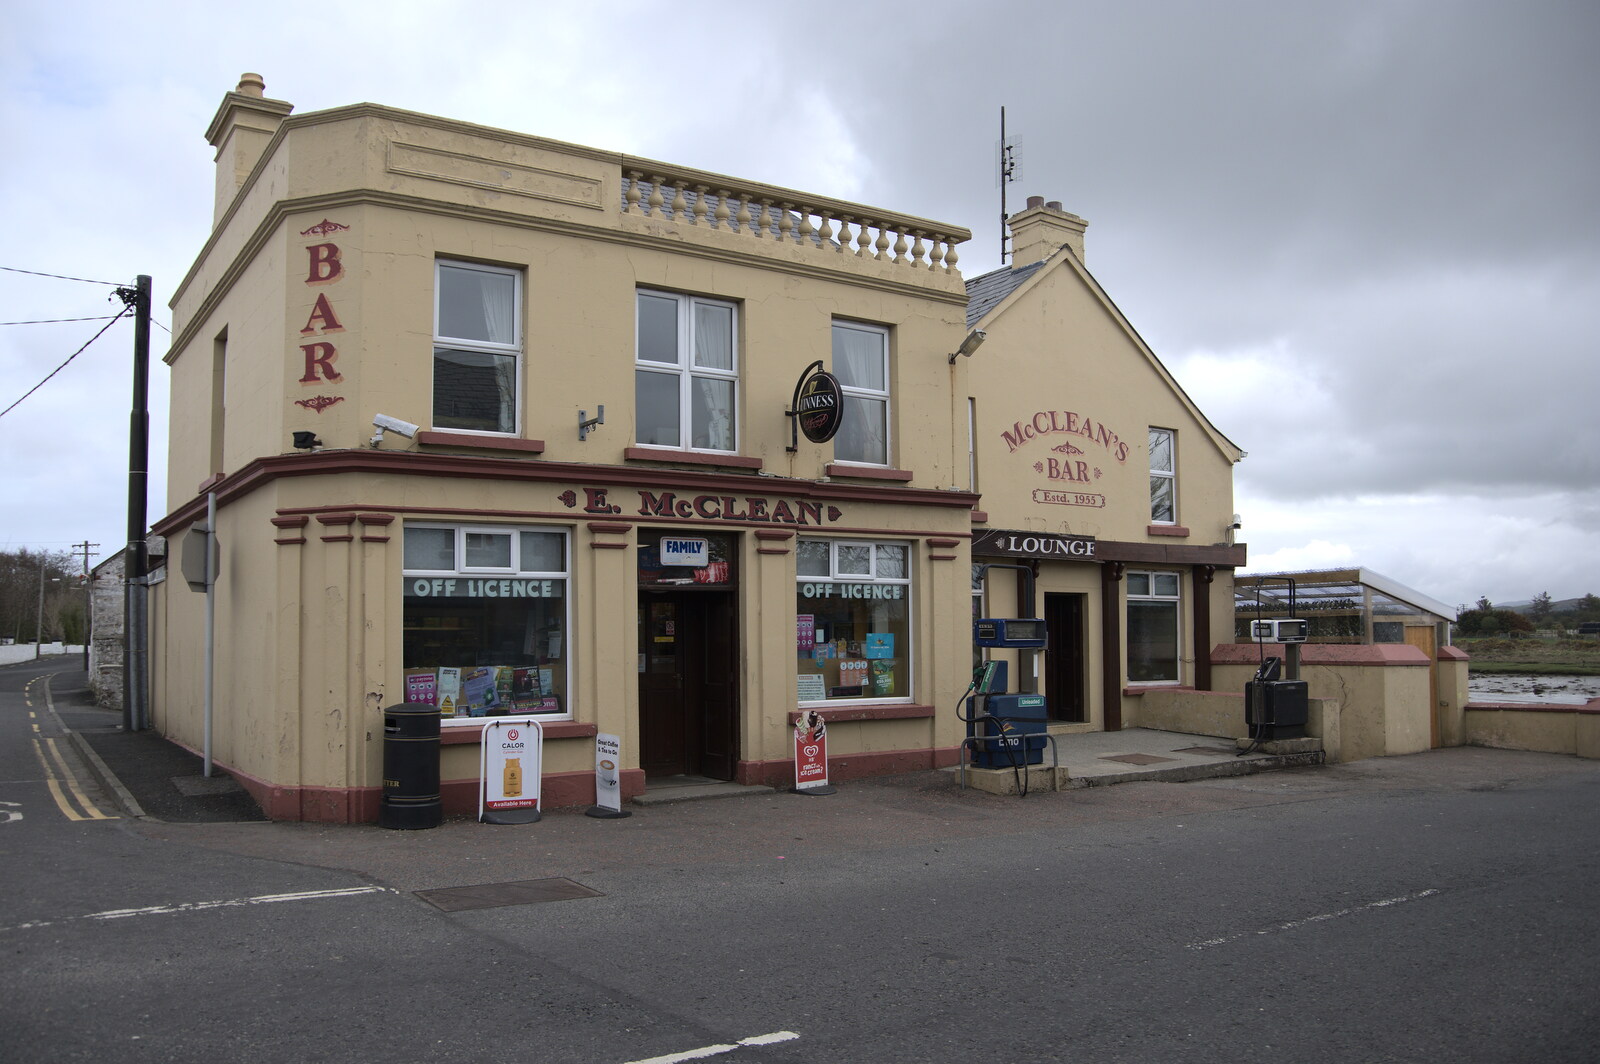 Greencastle, Doagh and Malin Head, County Donegal, Ireland - 19th April 2022: McClean's bar in Malin